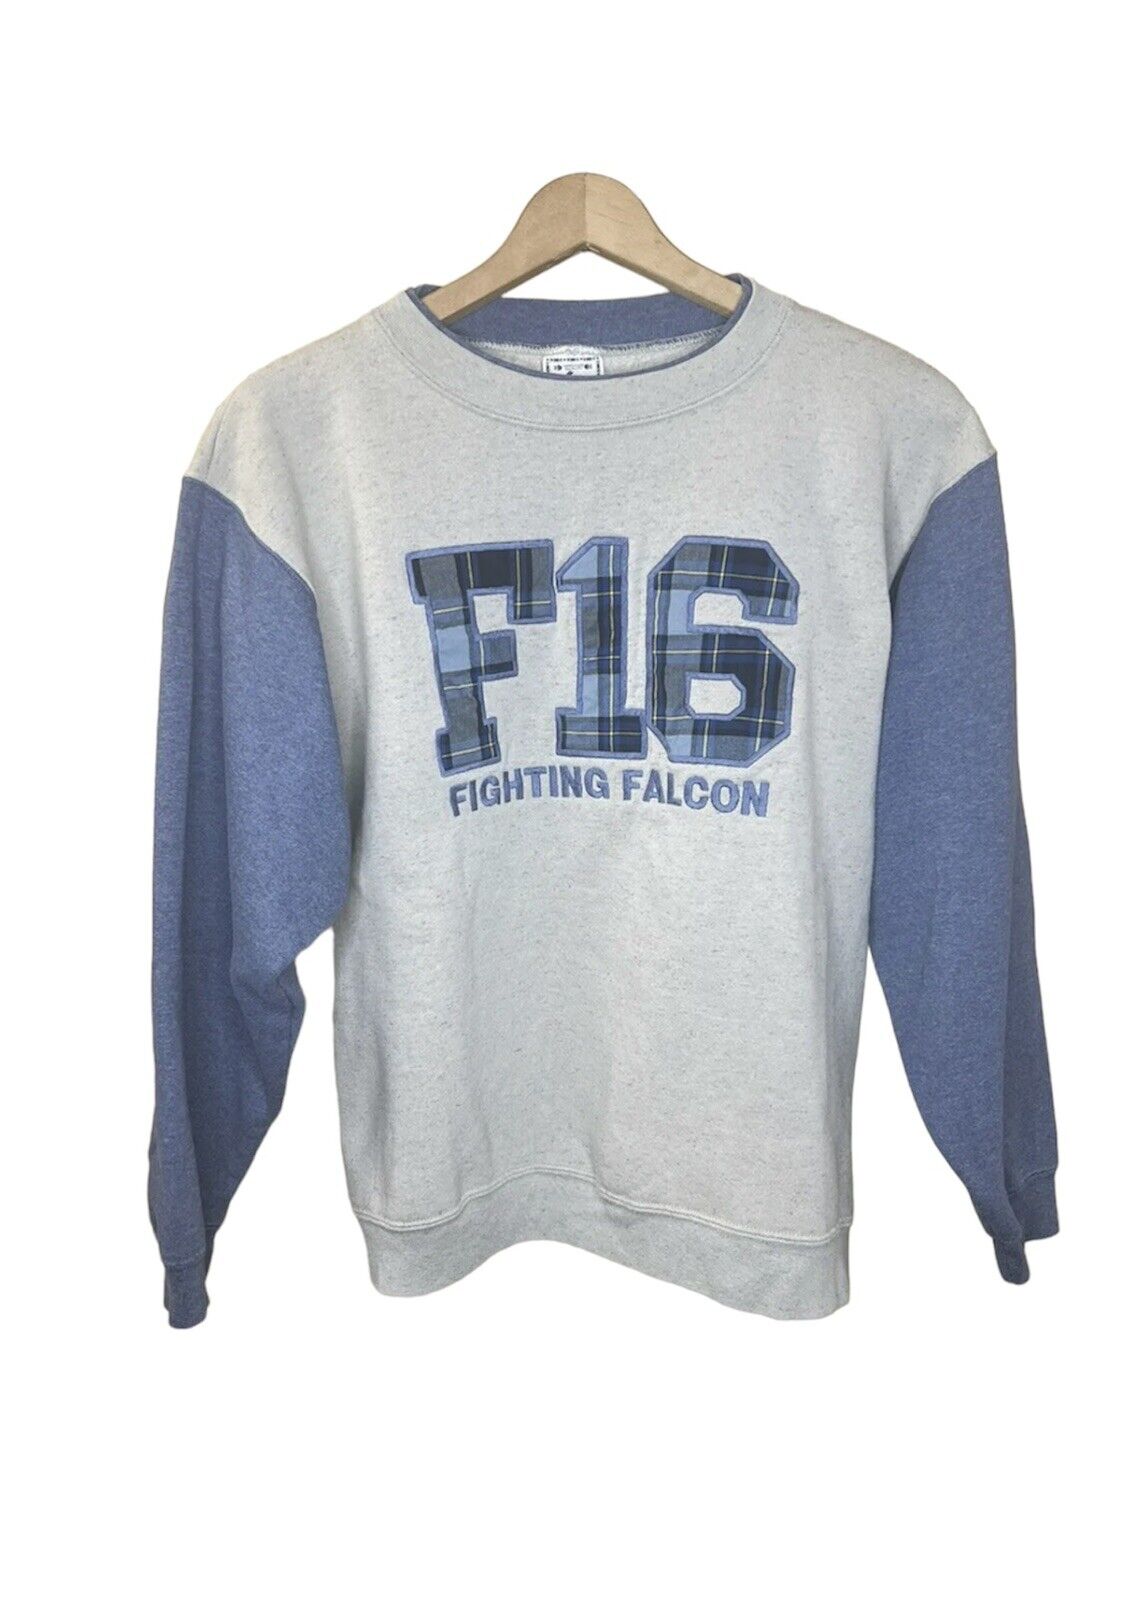 Vintage F-16 Fighting Falcon Large Crewneck Two Tone Blue Grey Embroidered 